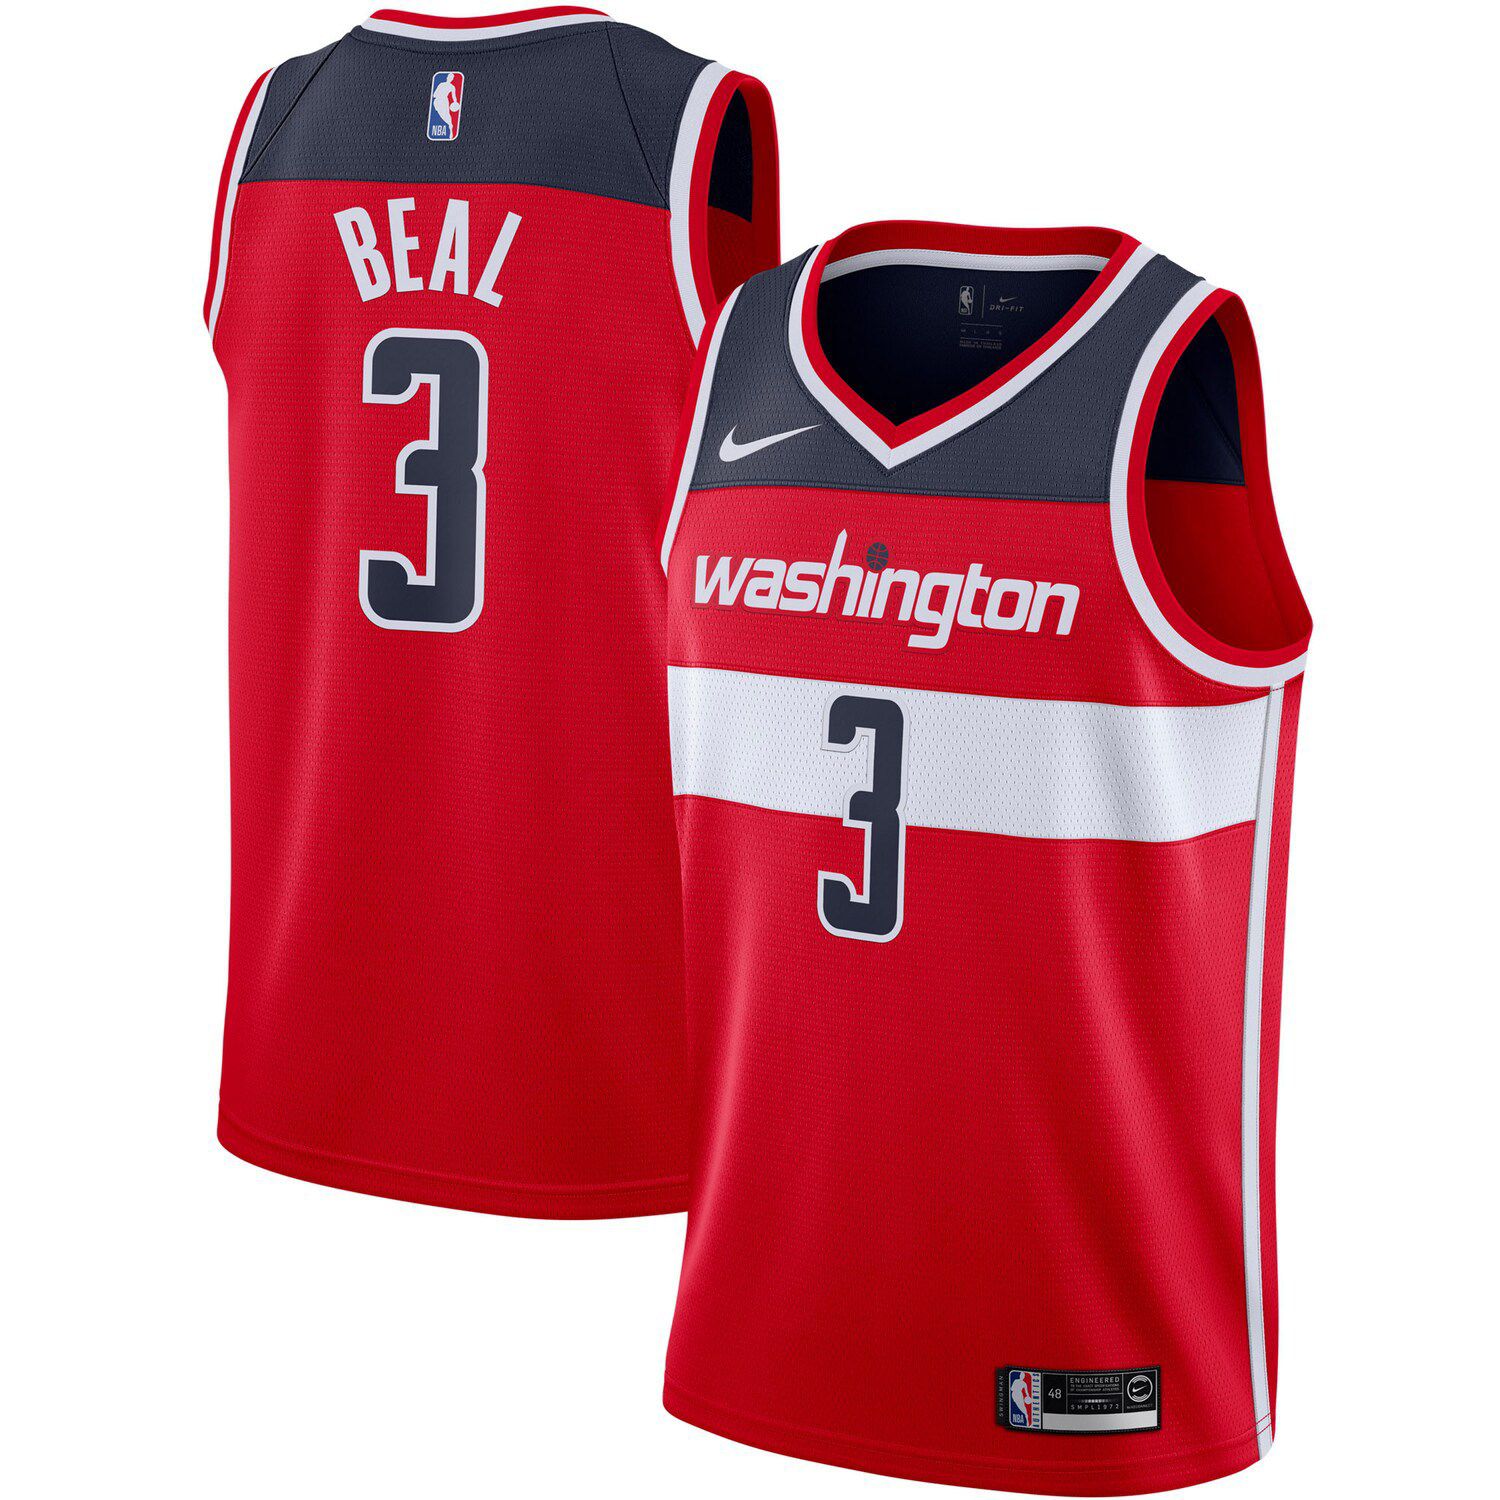 bradley beal authentic jersey